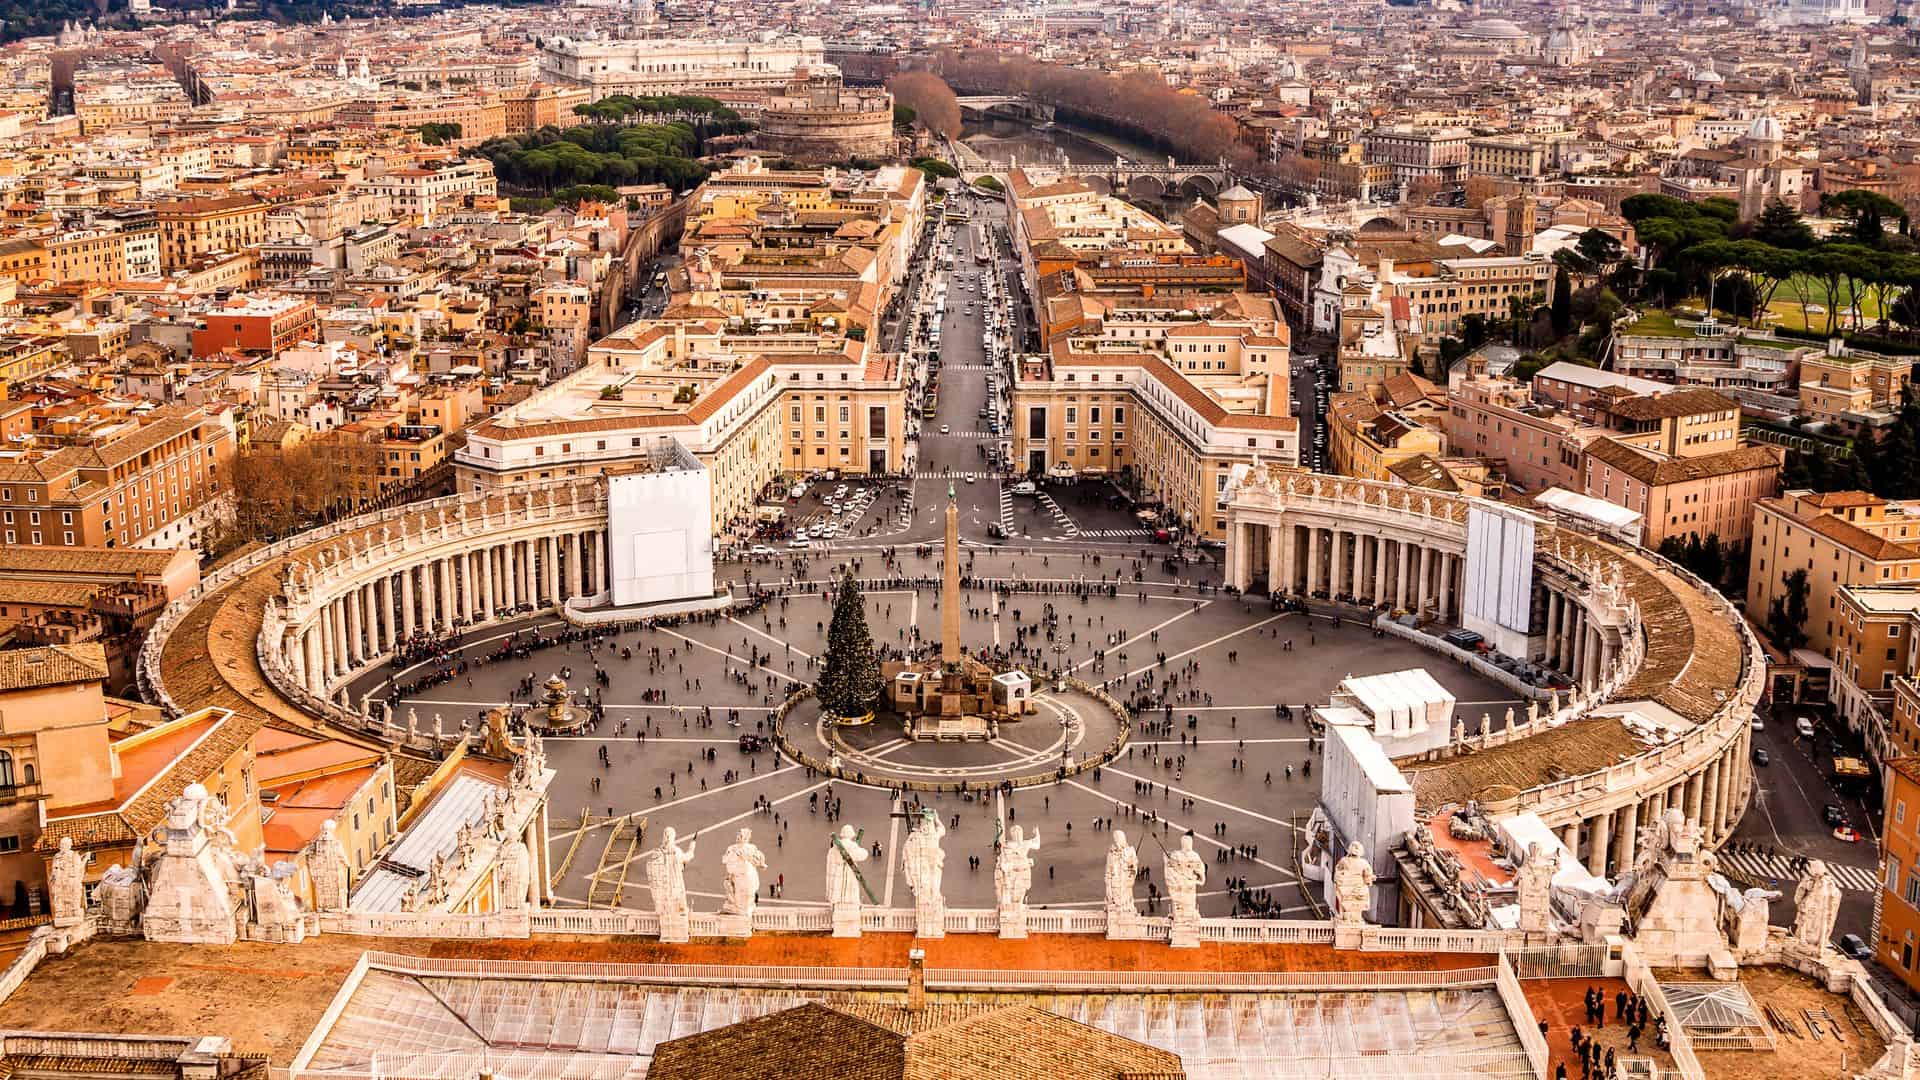 A view of Vatican City from above.